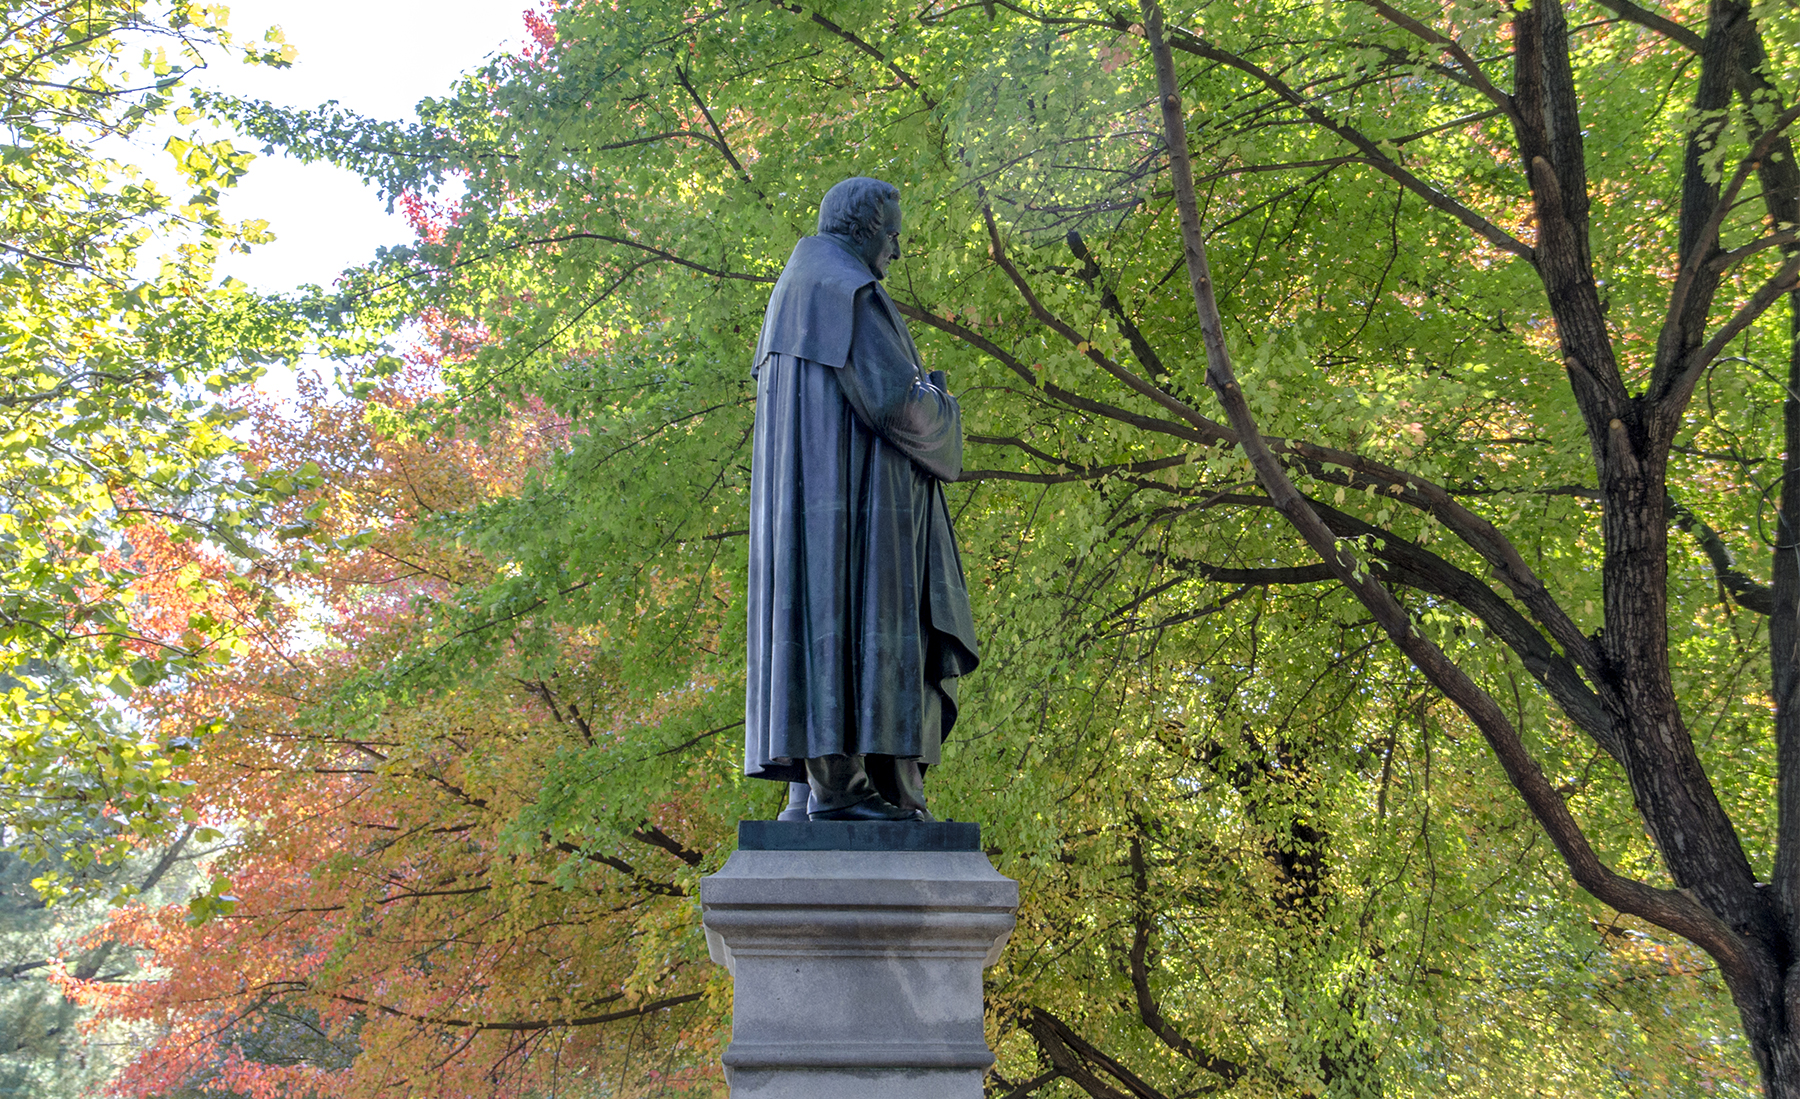 Statue of Alexander von Humboldt surrounded by green leaves in Philadelphia's Fairmount Park